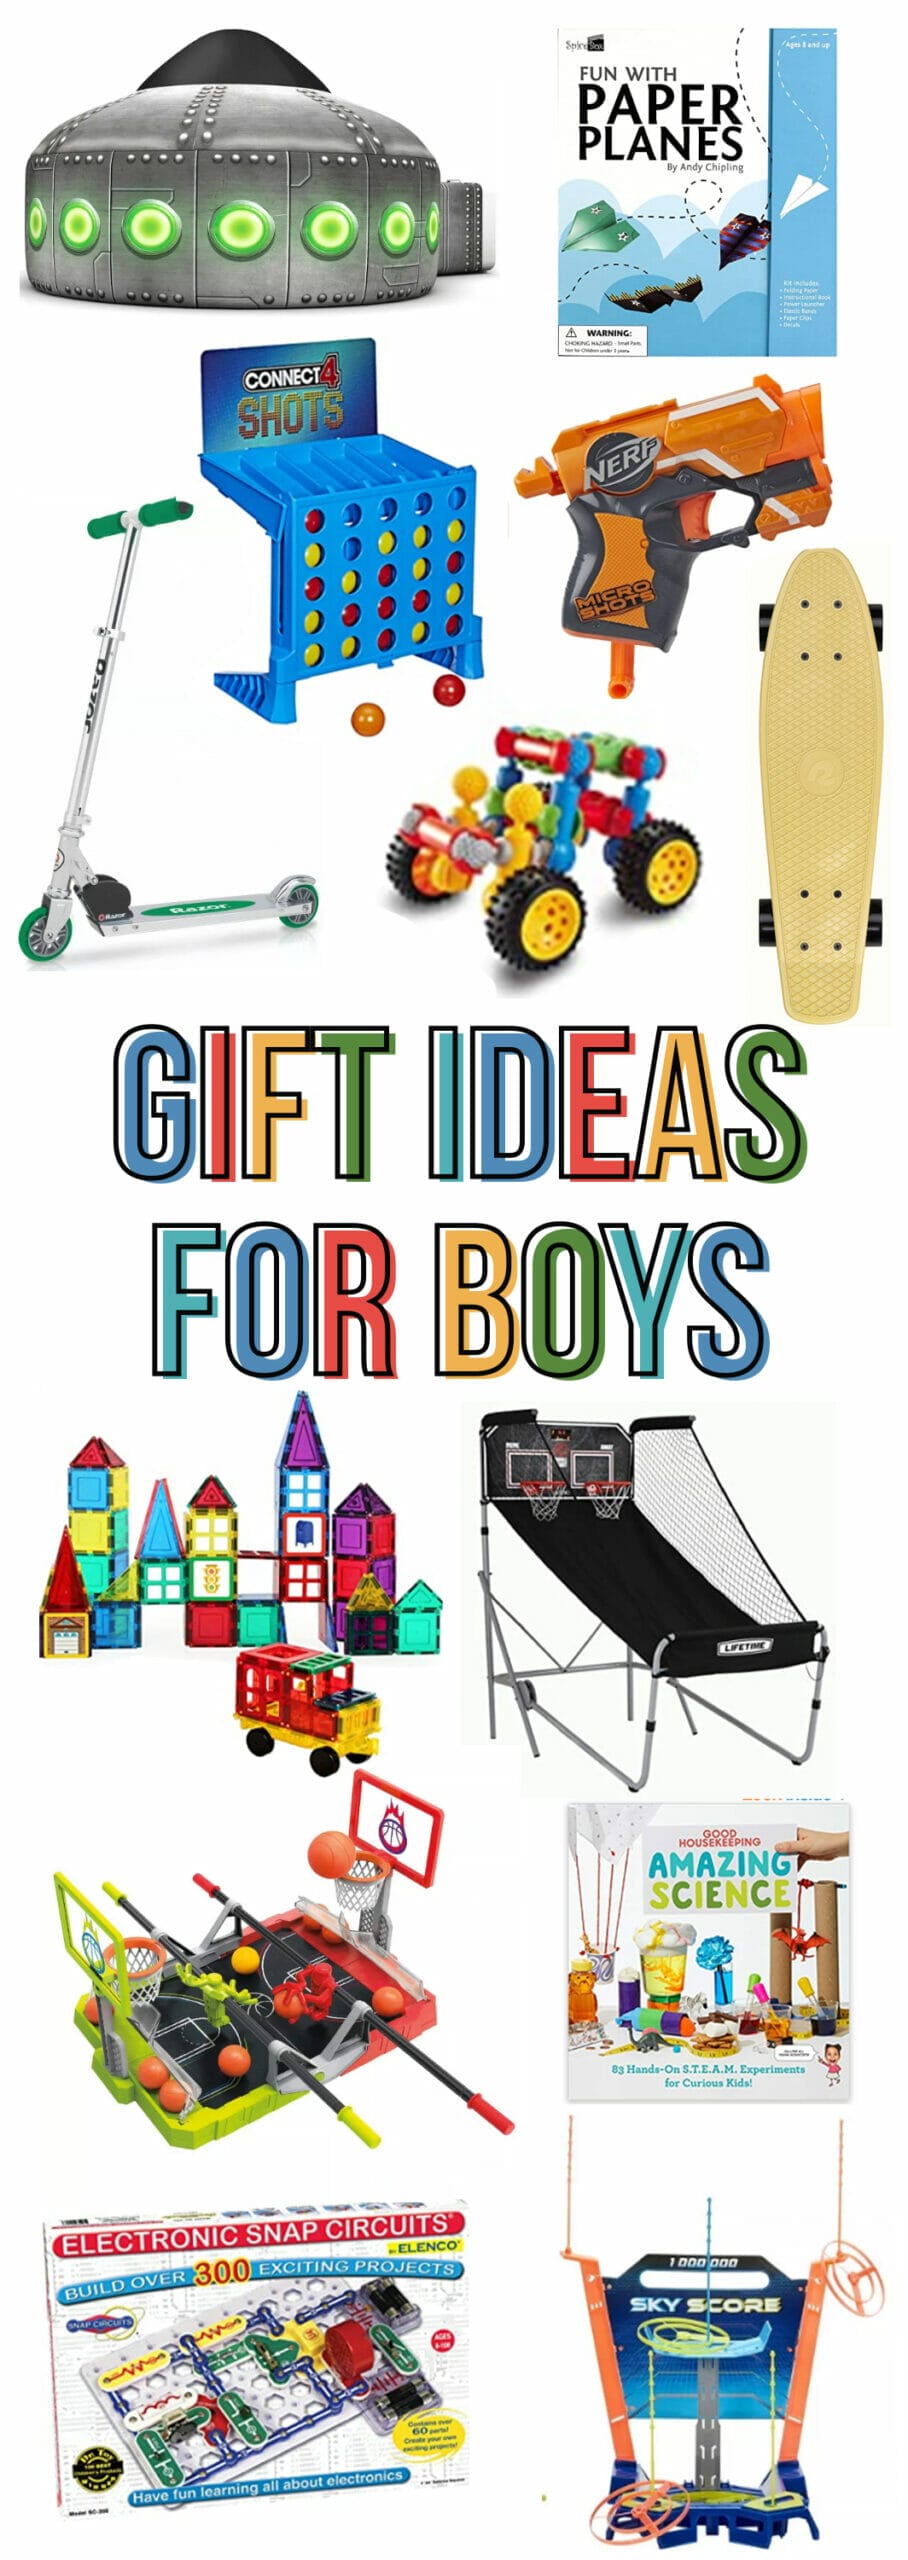 Gift Ideas for Boys on a white background